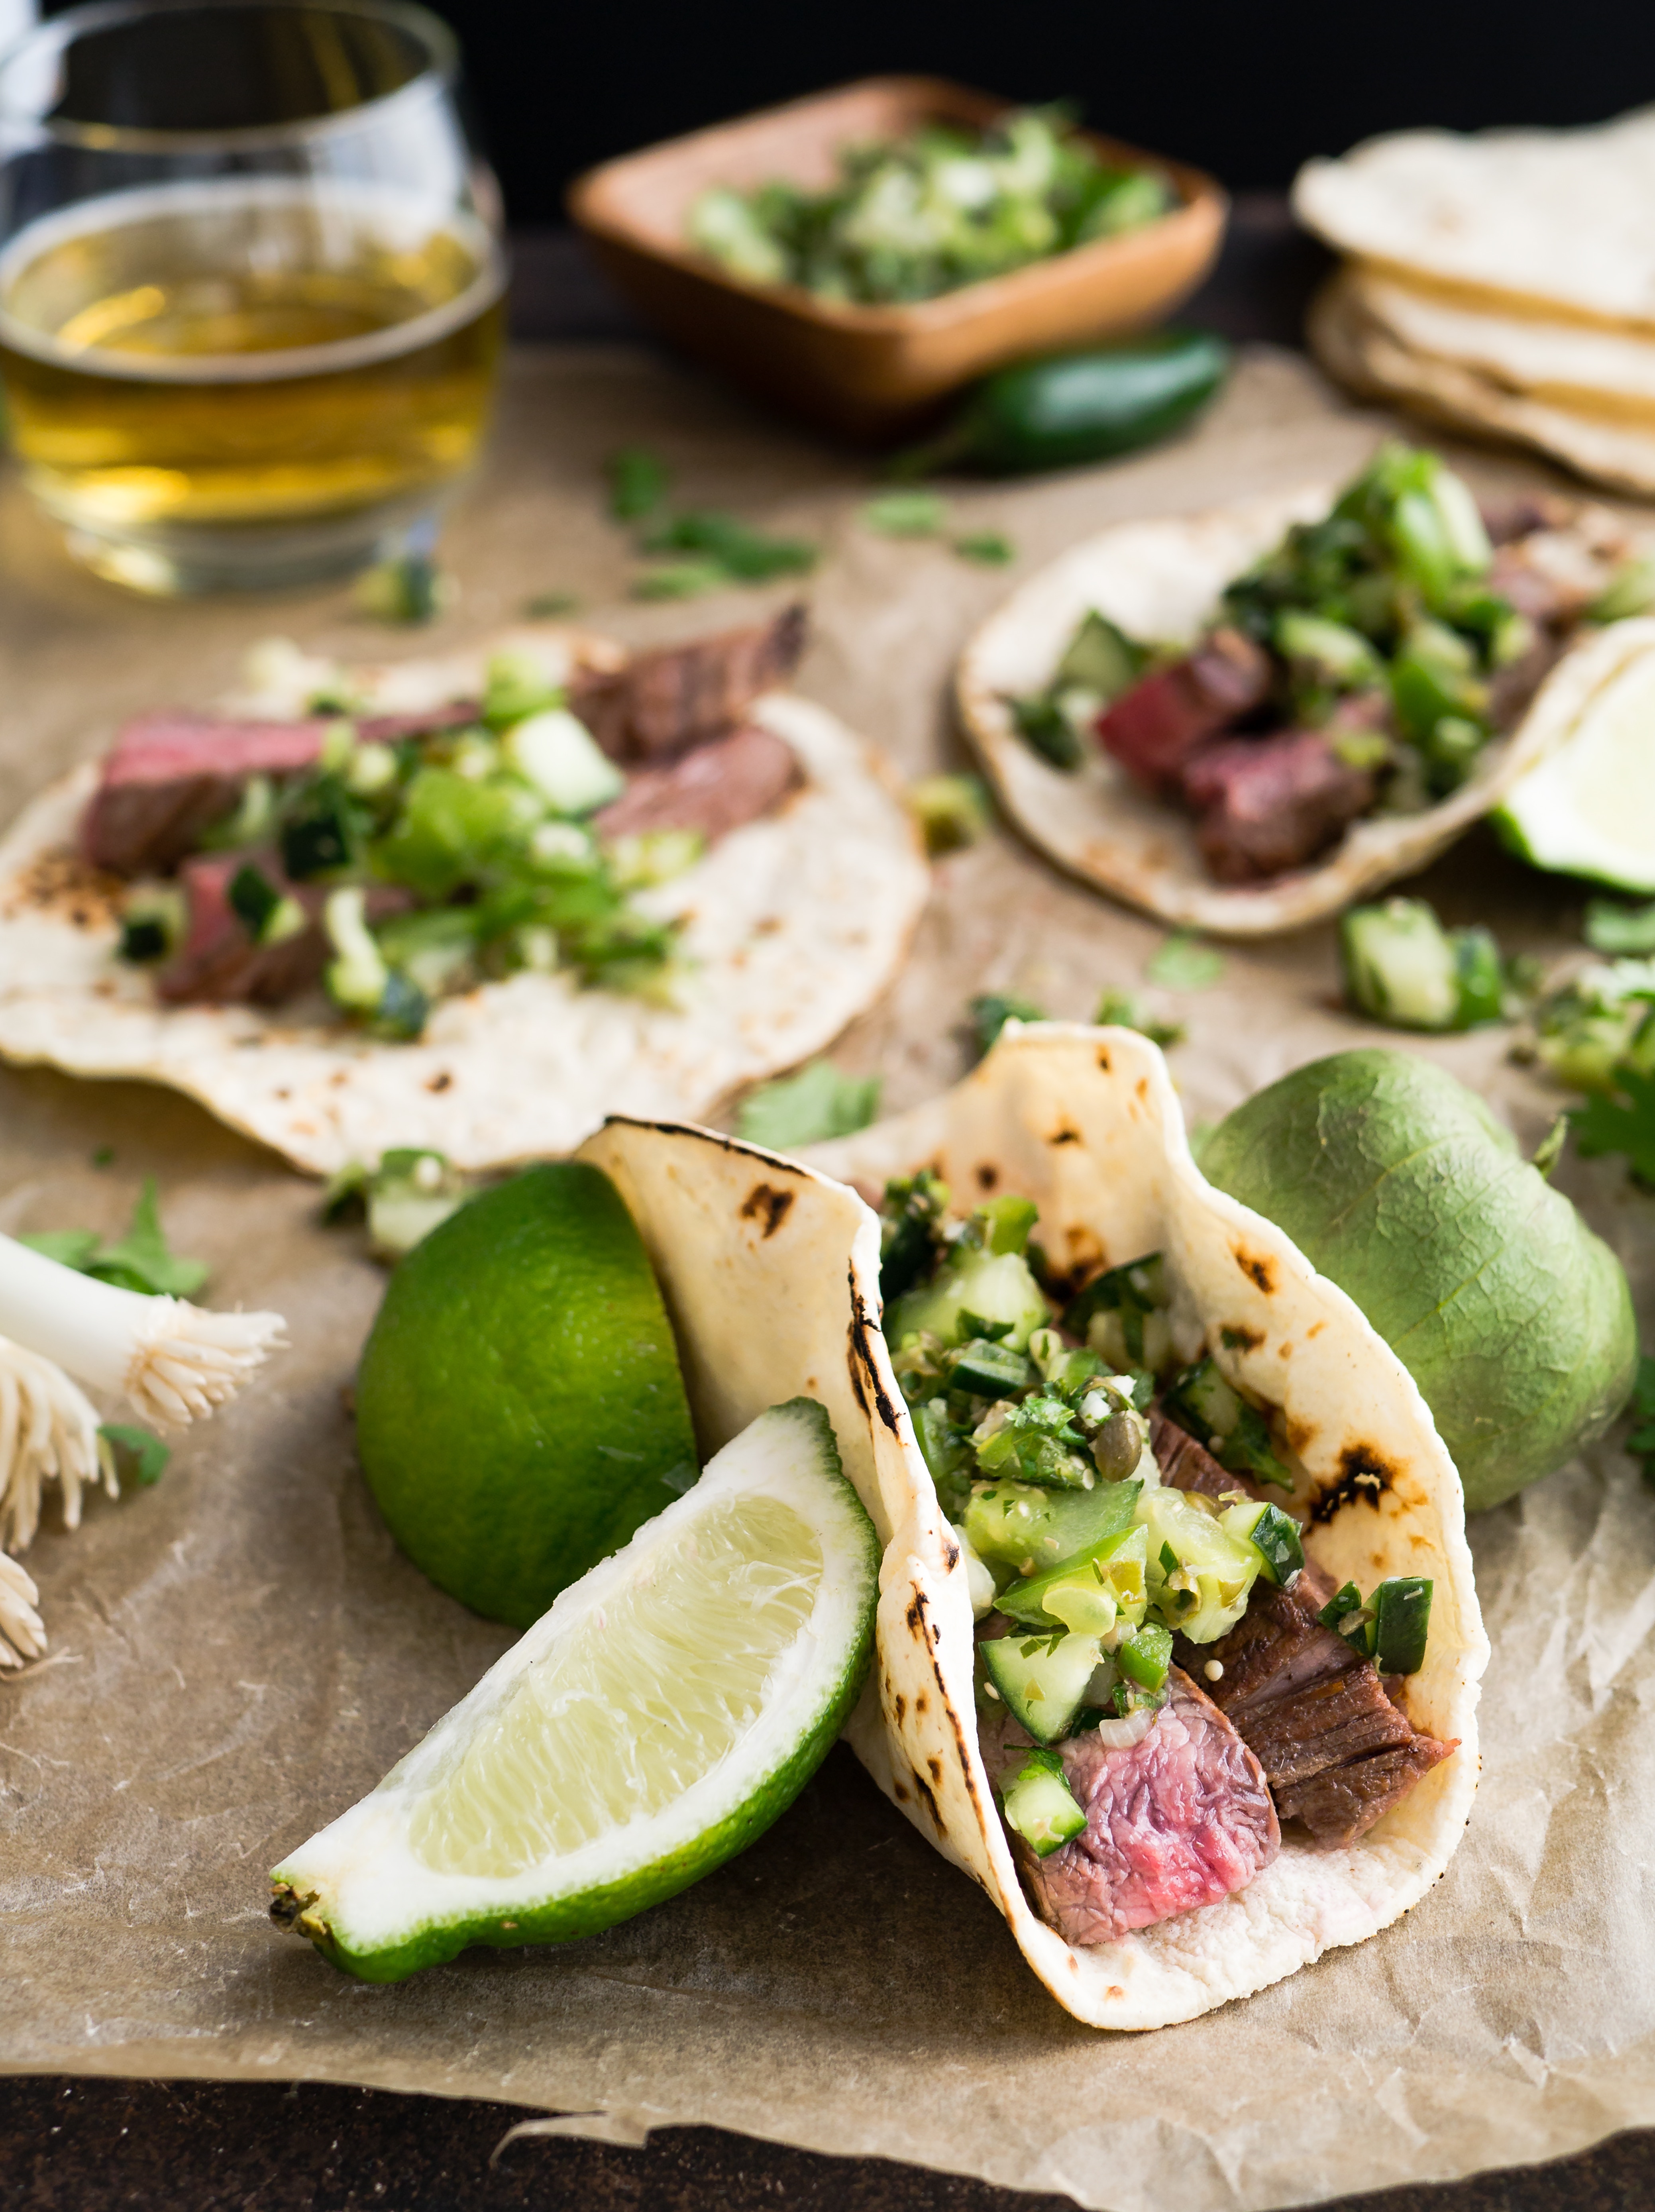 Mexico City Dishes: Best Local Cuisine